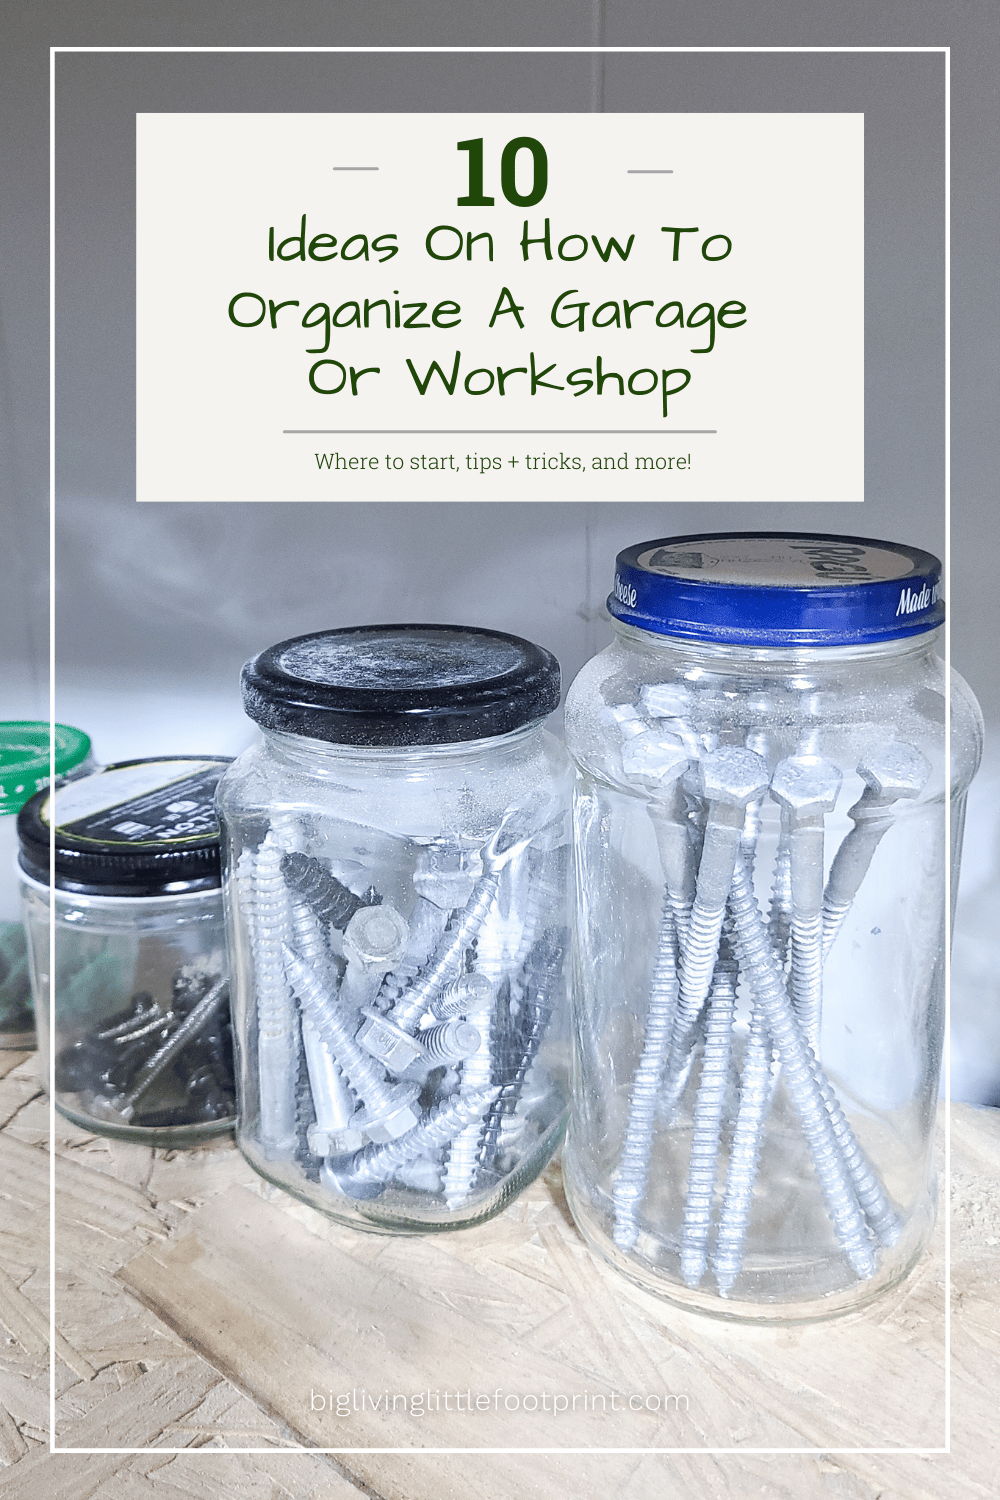 reusing food jars to hold screws and help organize a garage and workshop with small items.